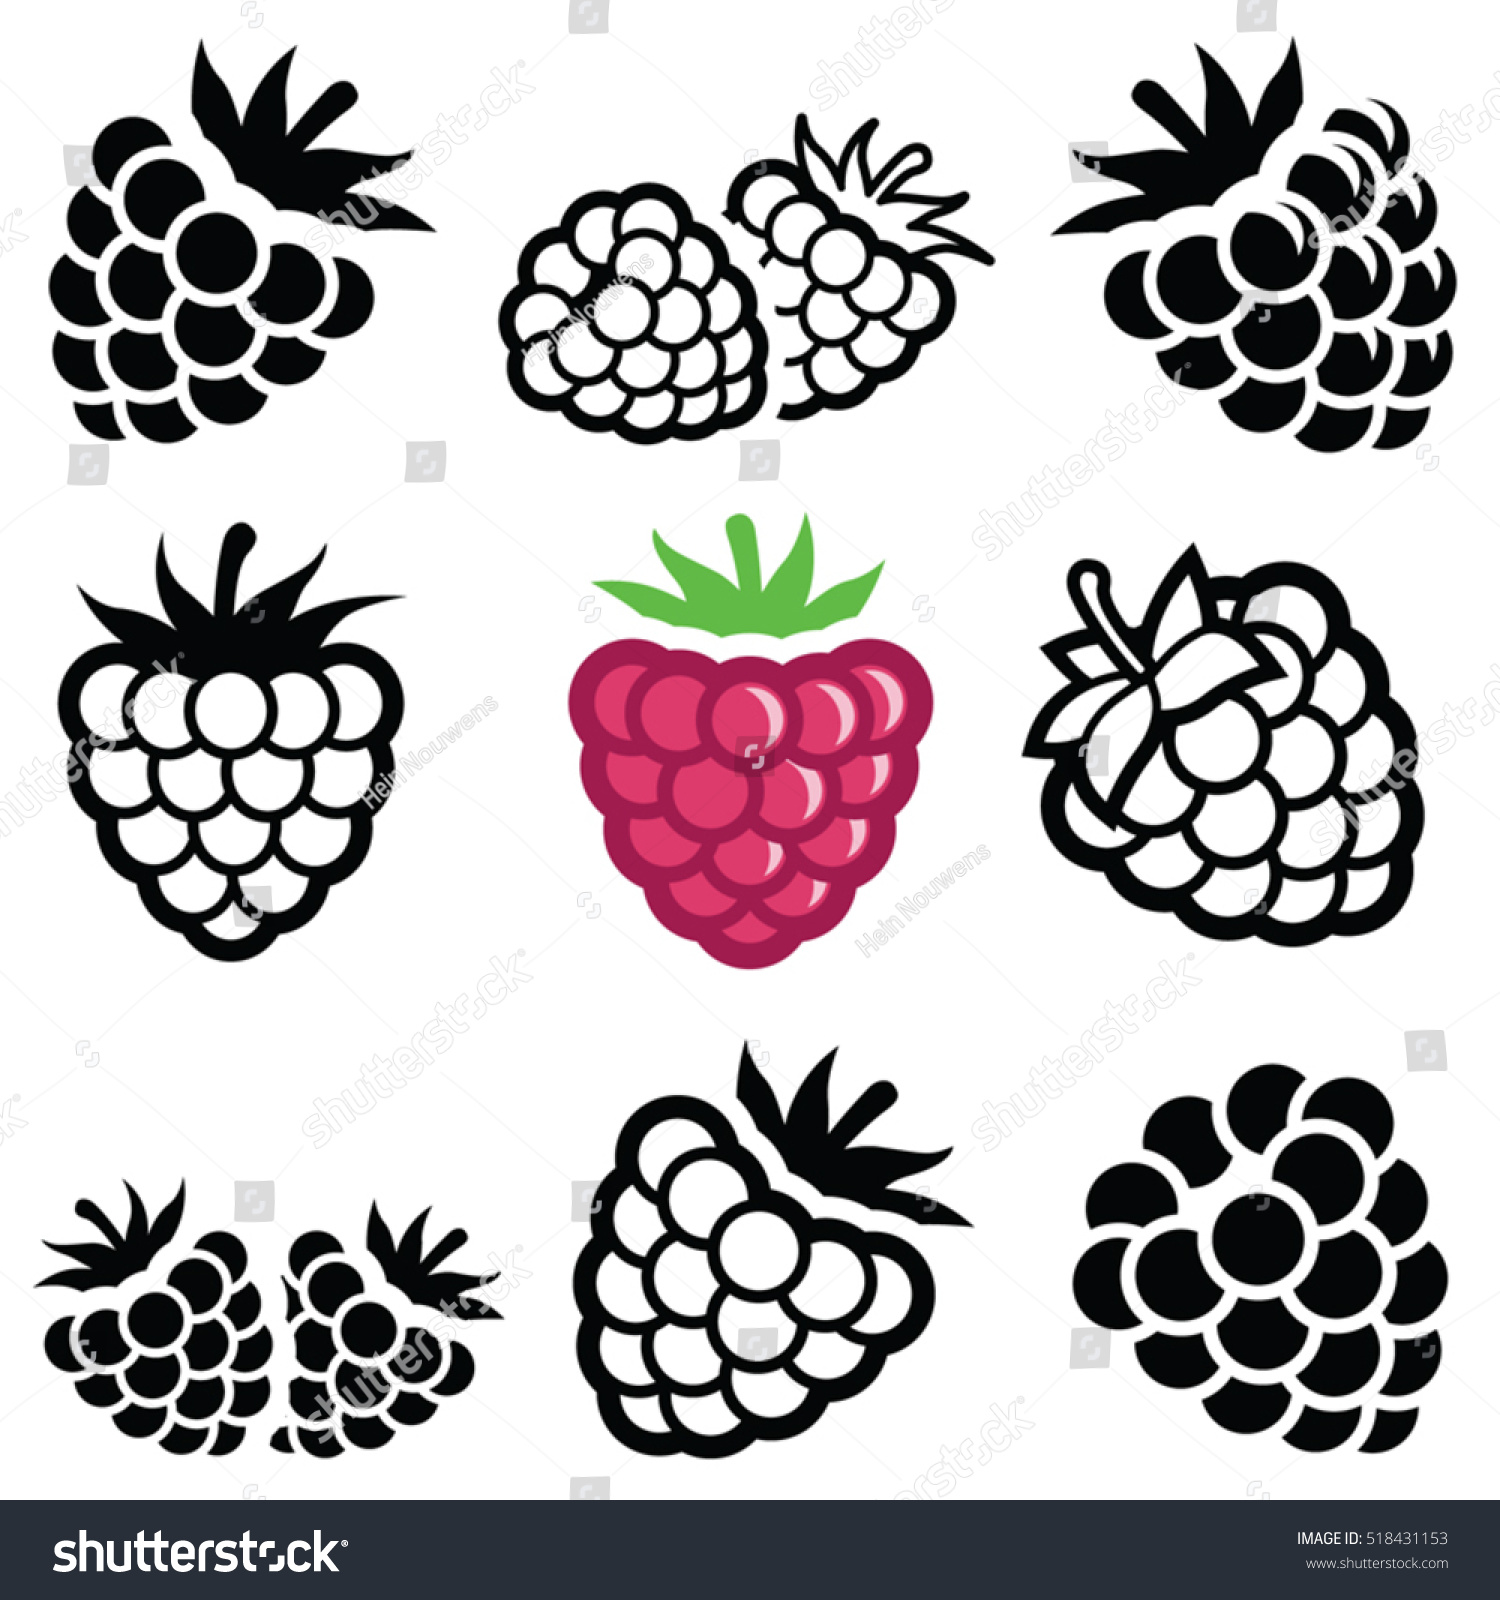 Raspberry fruit icon collection - vector outline and silhouette #518431153